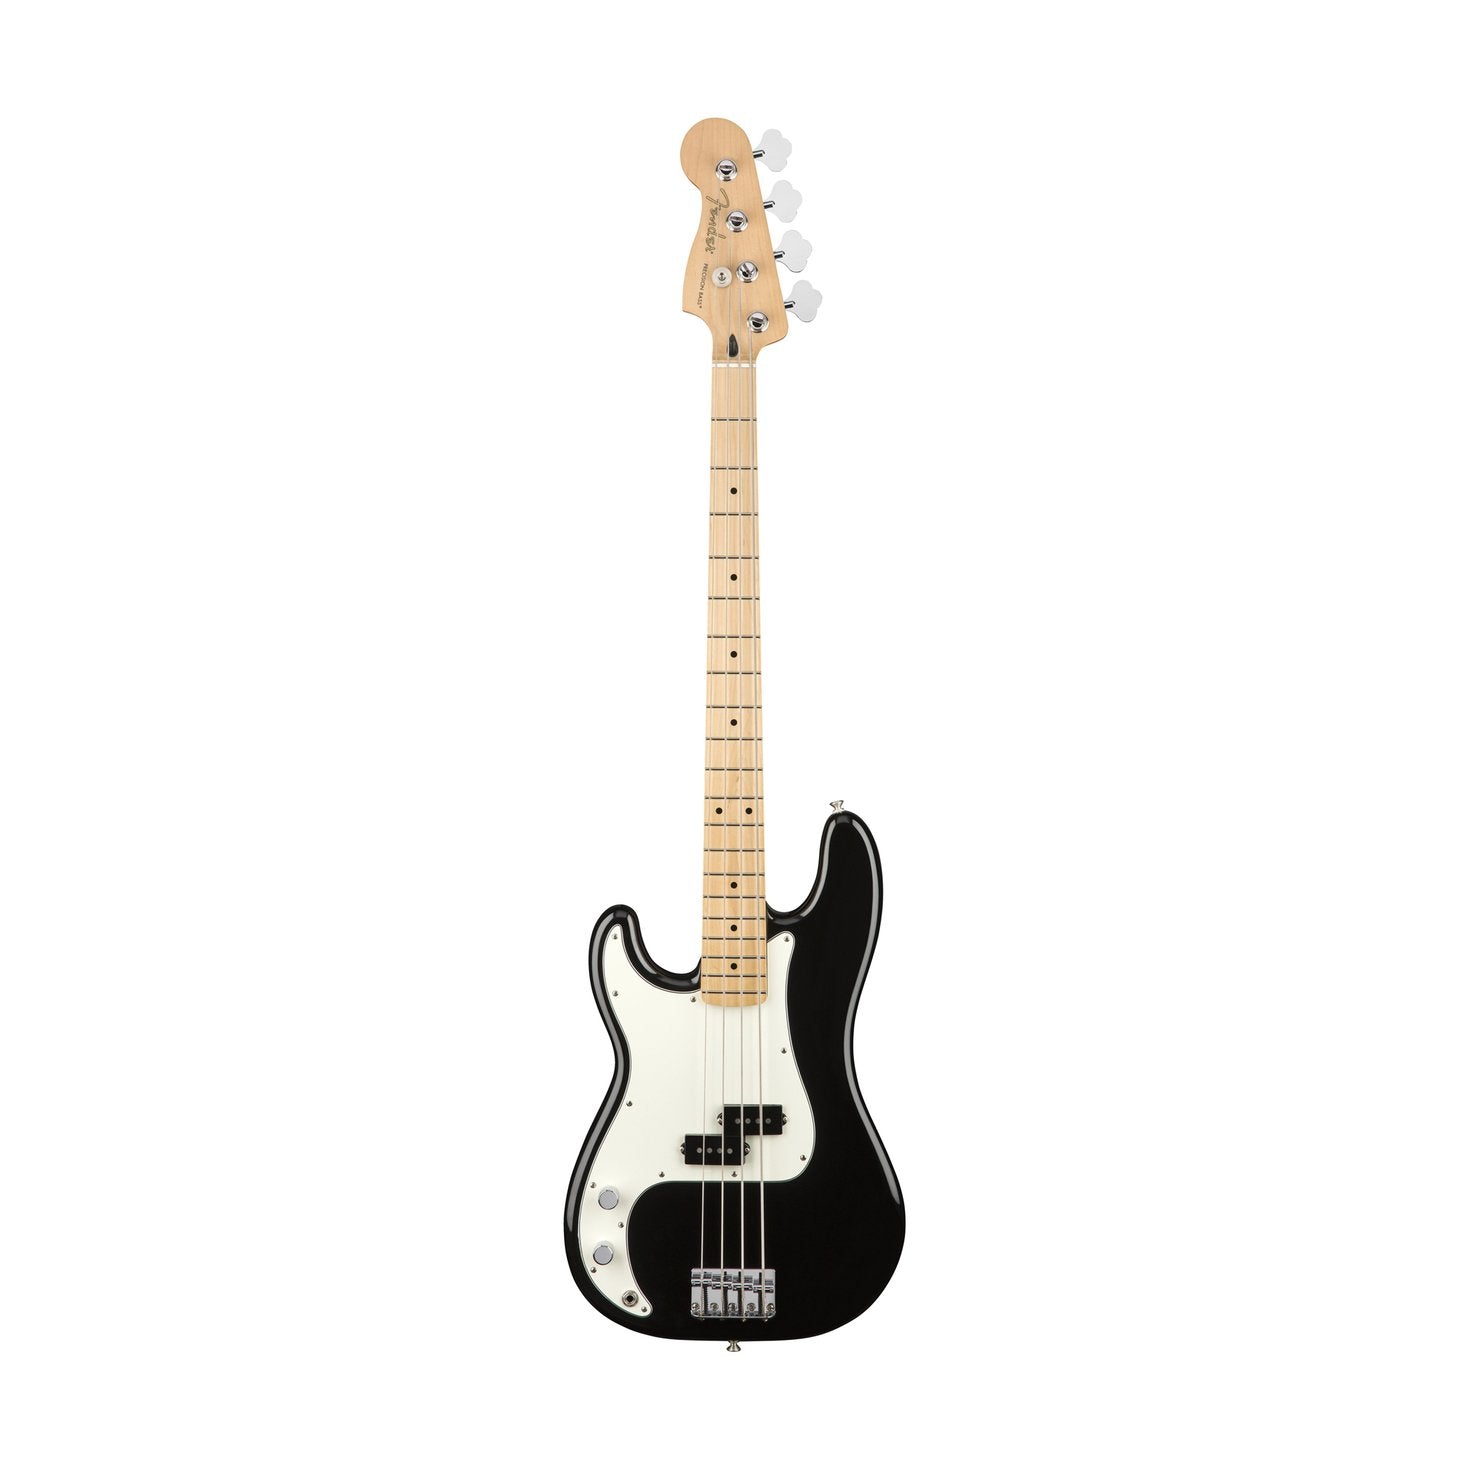 Fender Player Precision Bass Left-Handed Guitar, Maple FB, Black, FENDER, BASS GUITAR, fender-bass-guitar-f03-014-9822-506, ZOSO MUSIC SDN BHD